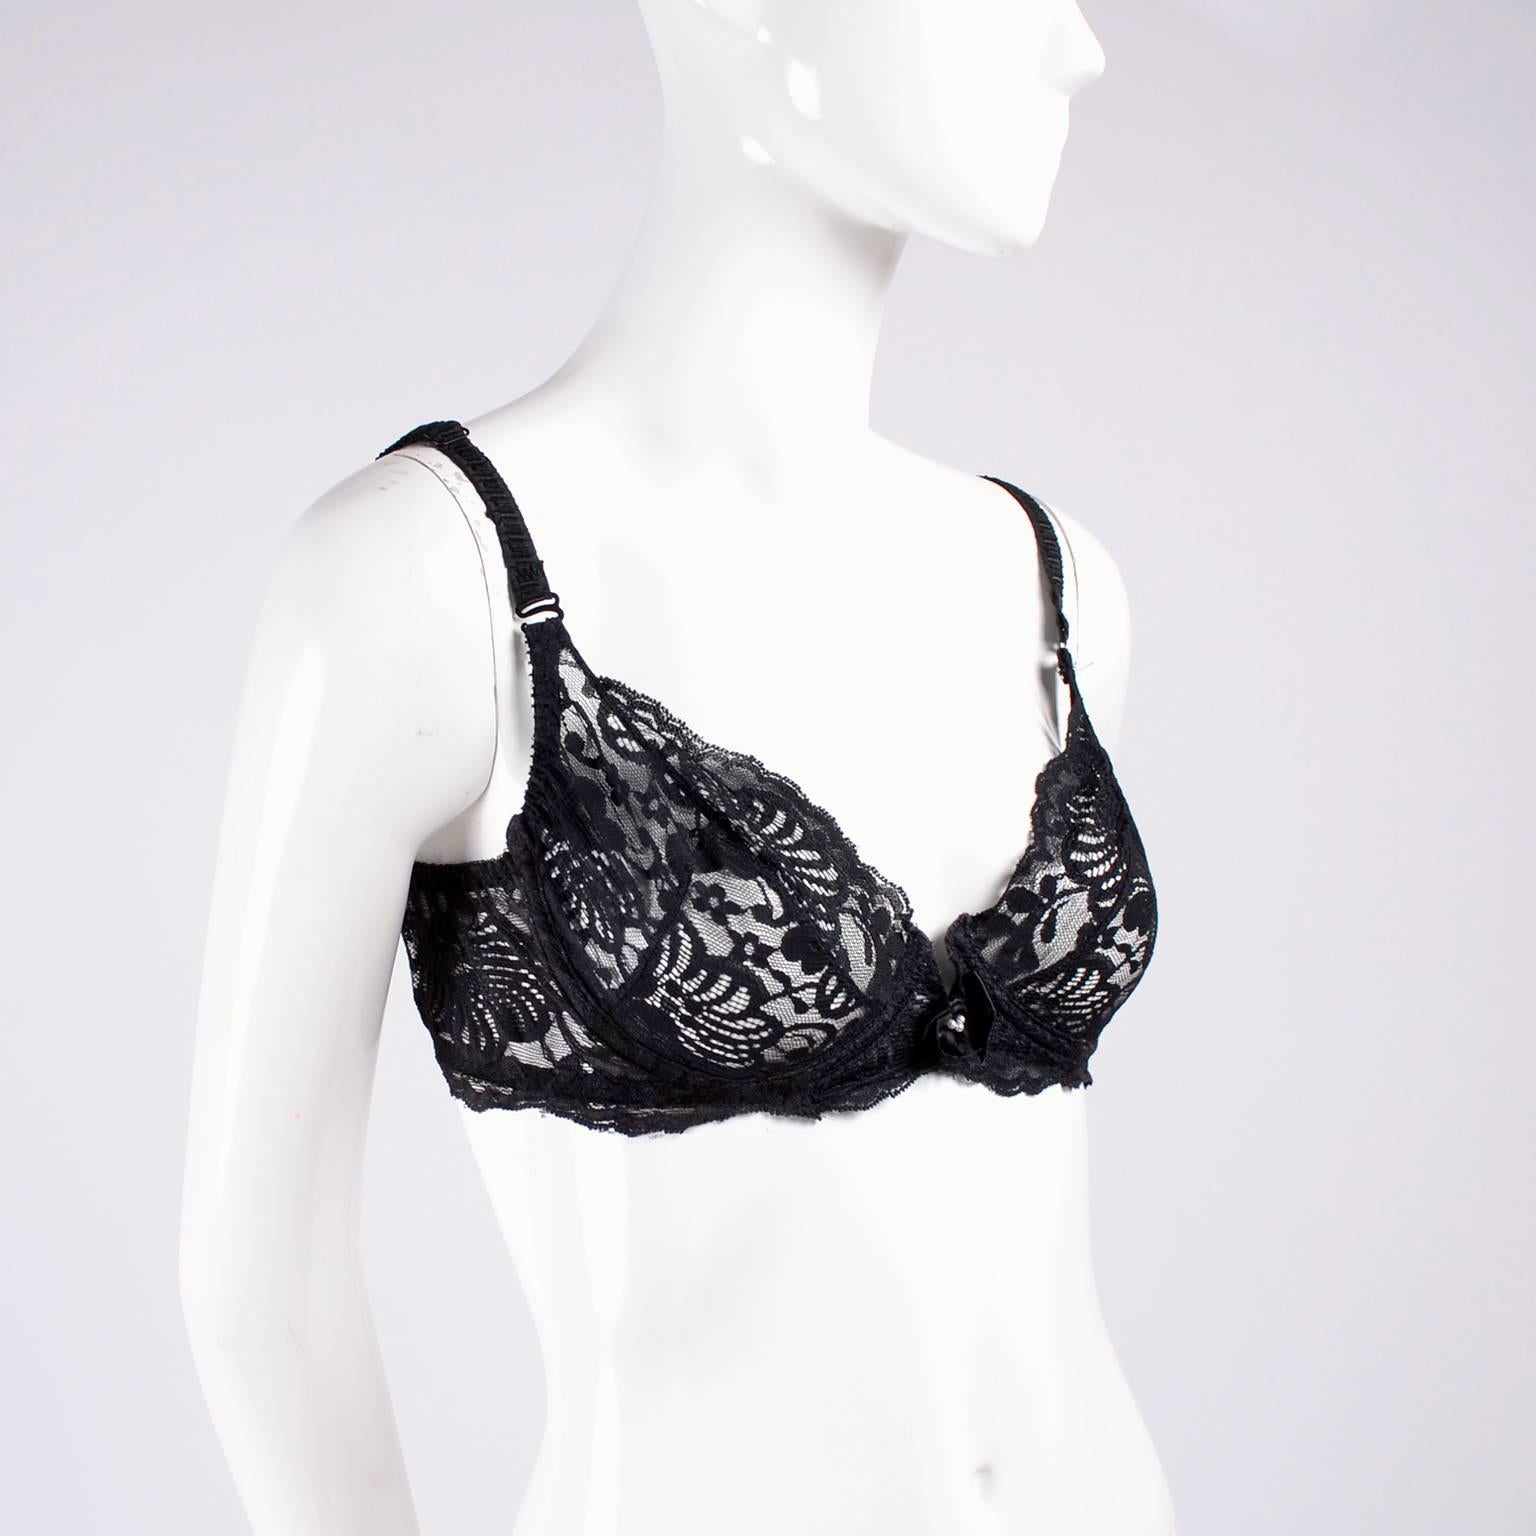 Cher Owned Black Underwire Lace Bra W Photograph of Cher in it  From Collector 1